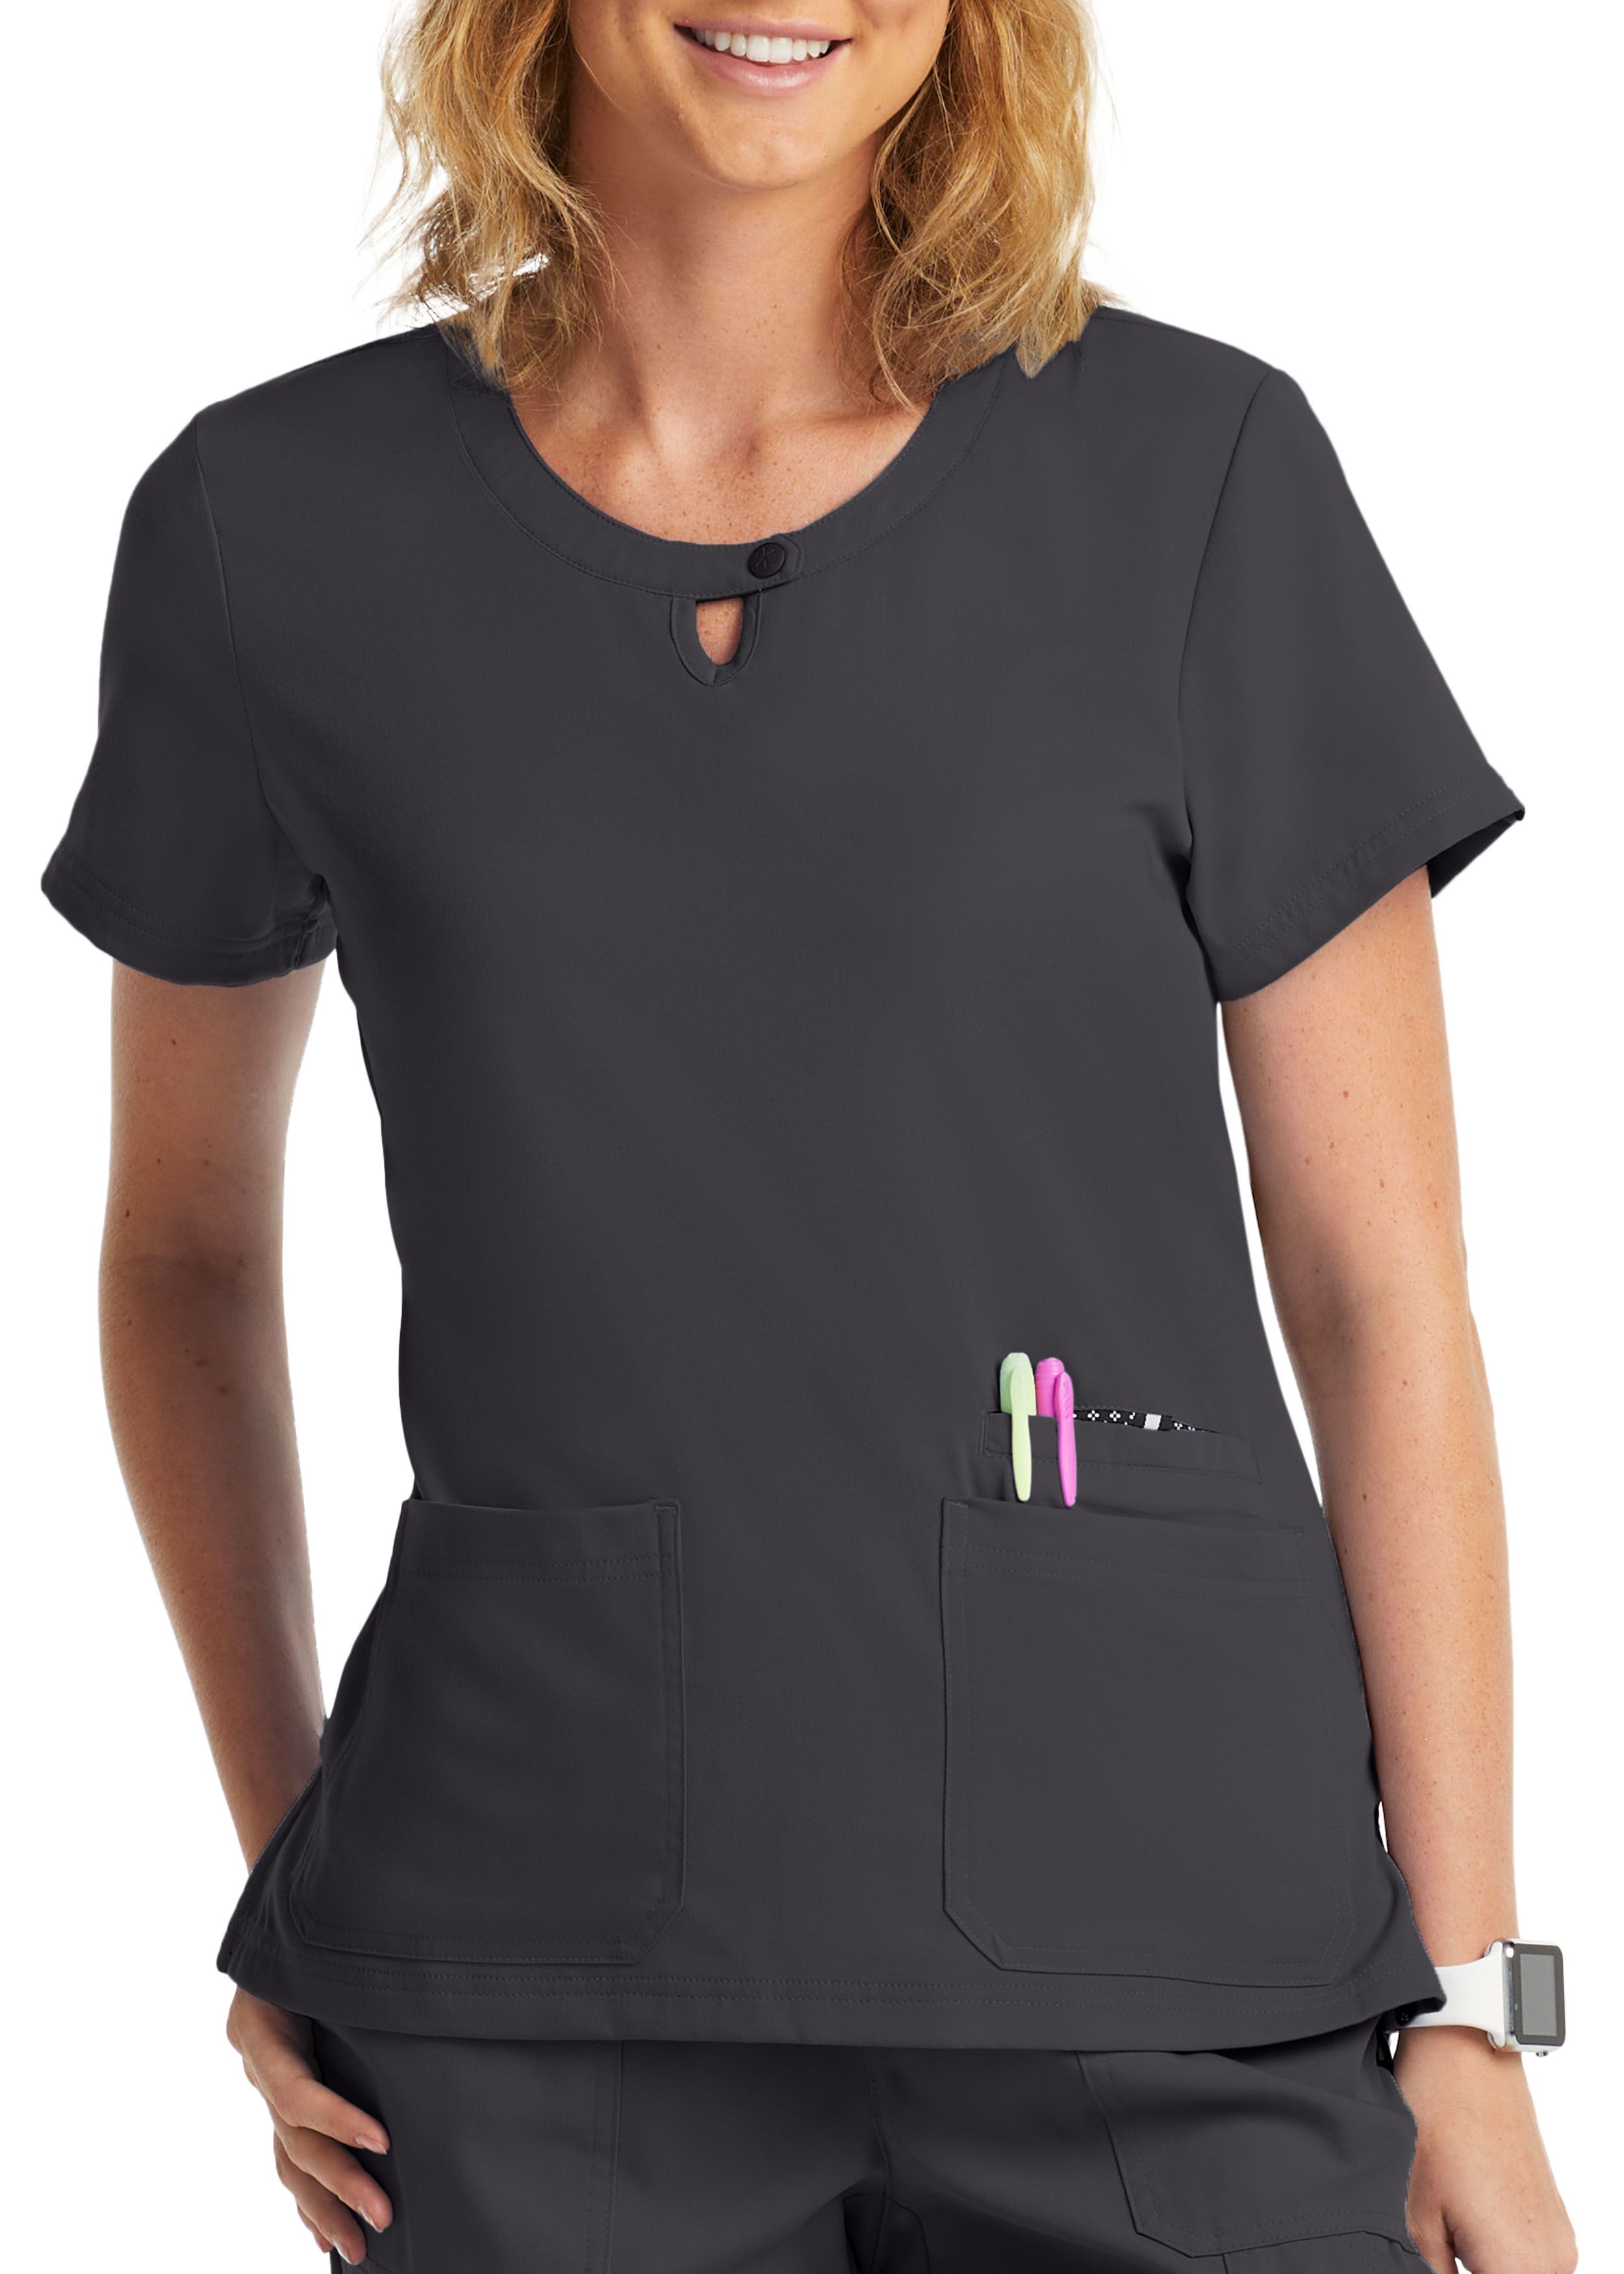 Beyond Scrubs Happiness Collection Spark Round Neck Scrub Top 